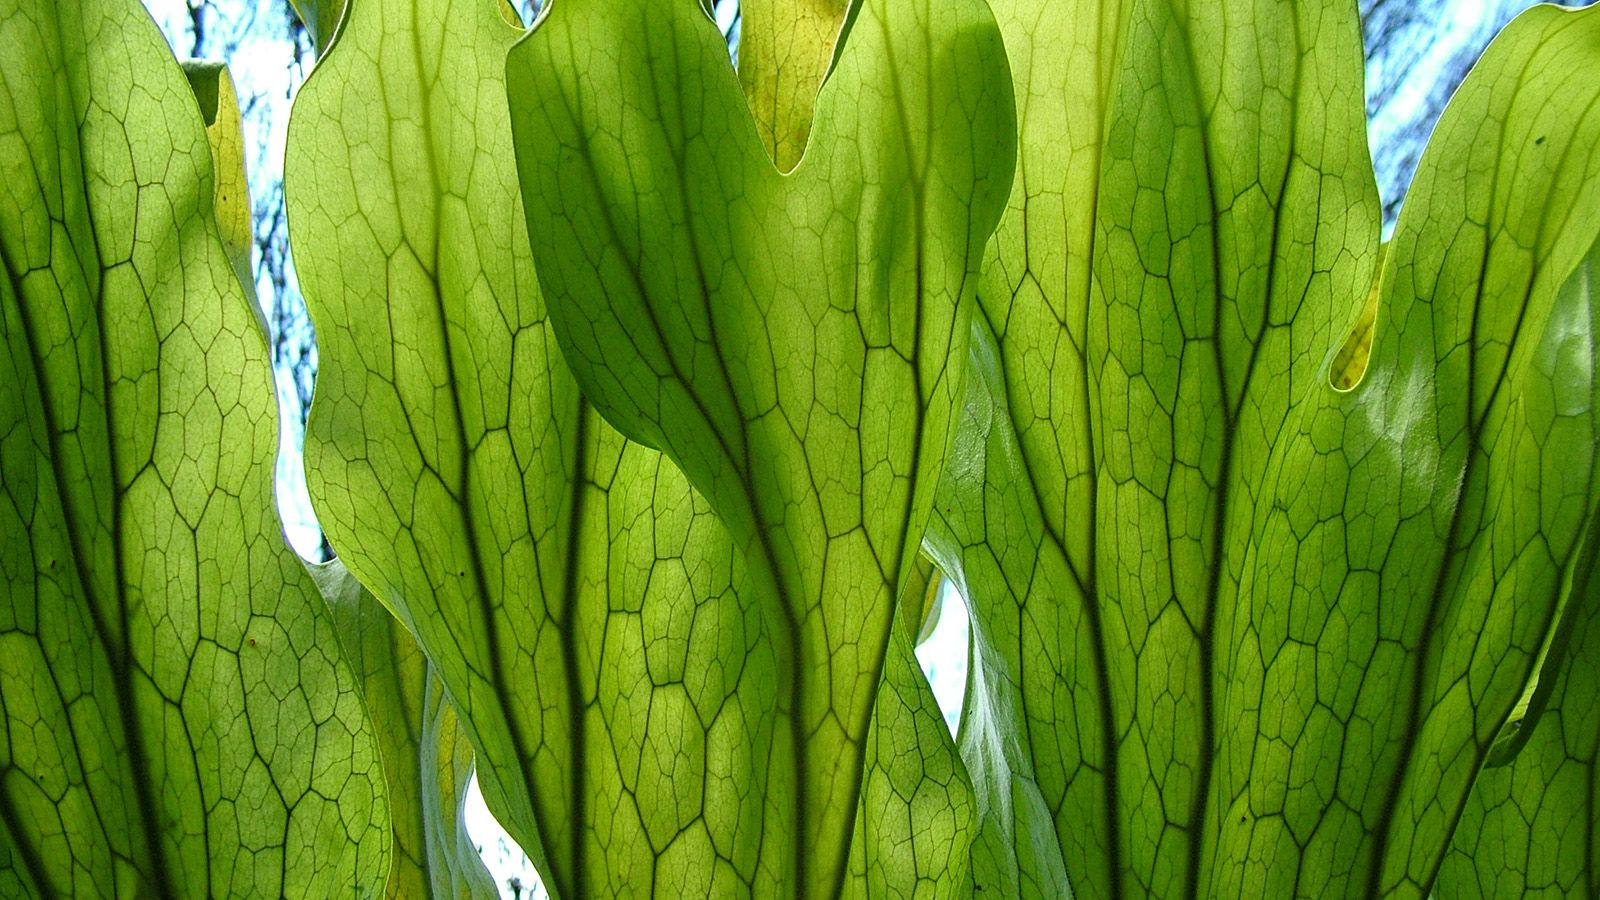 Close up photograph of veins running through bright green leaves. banner image